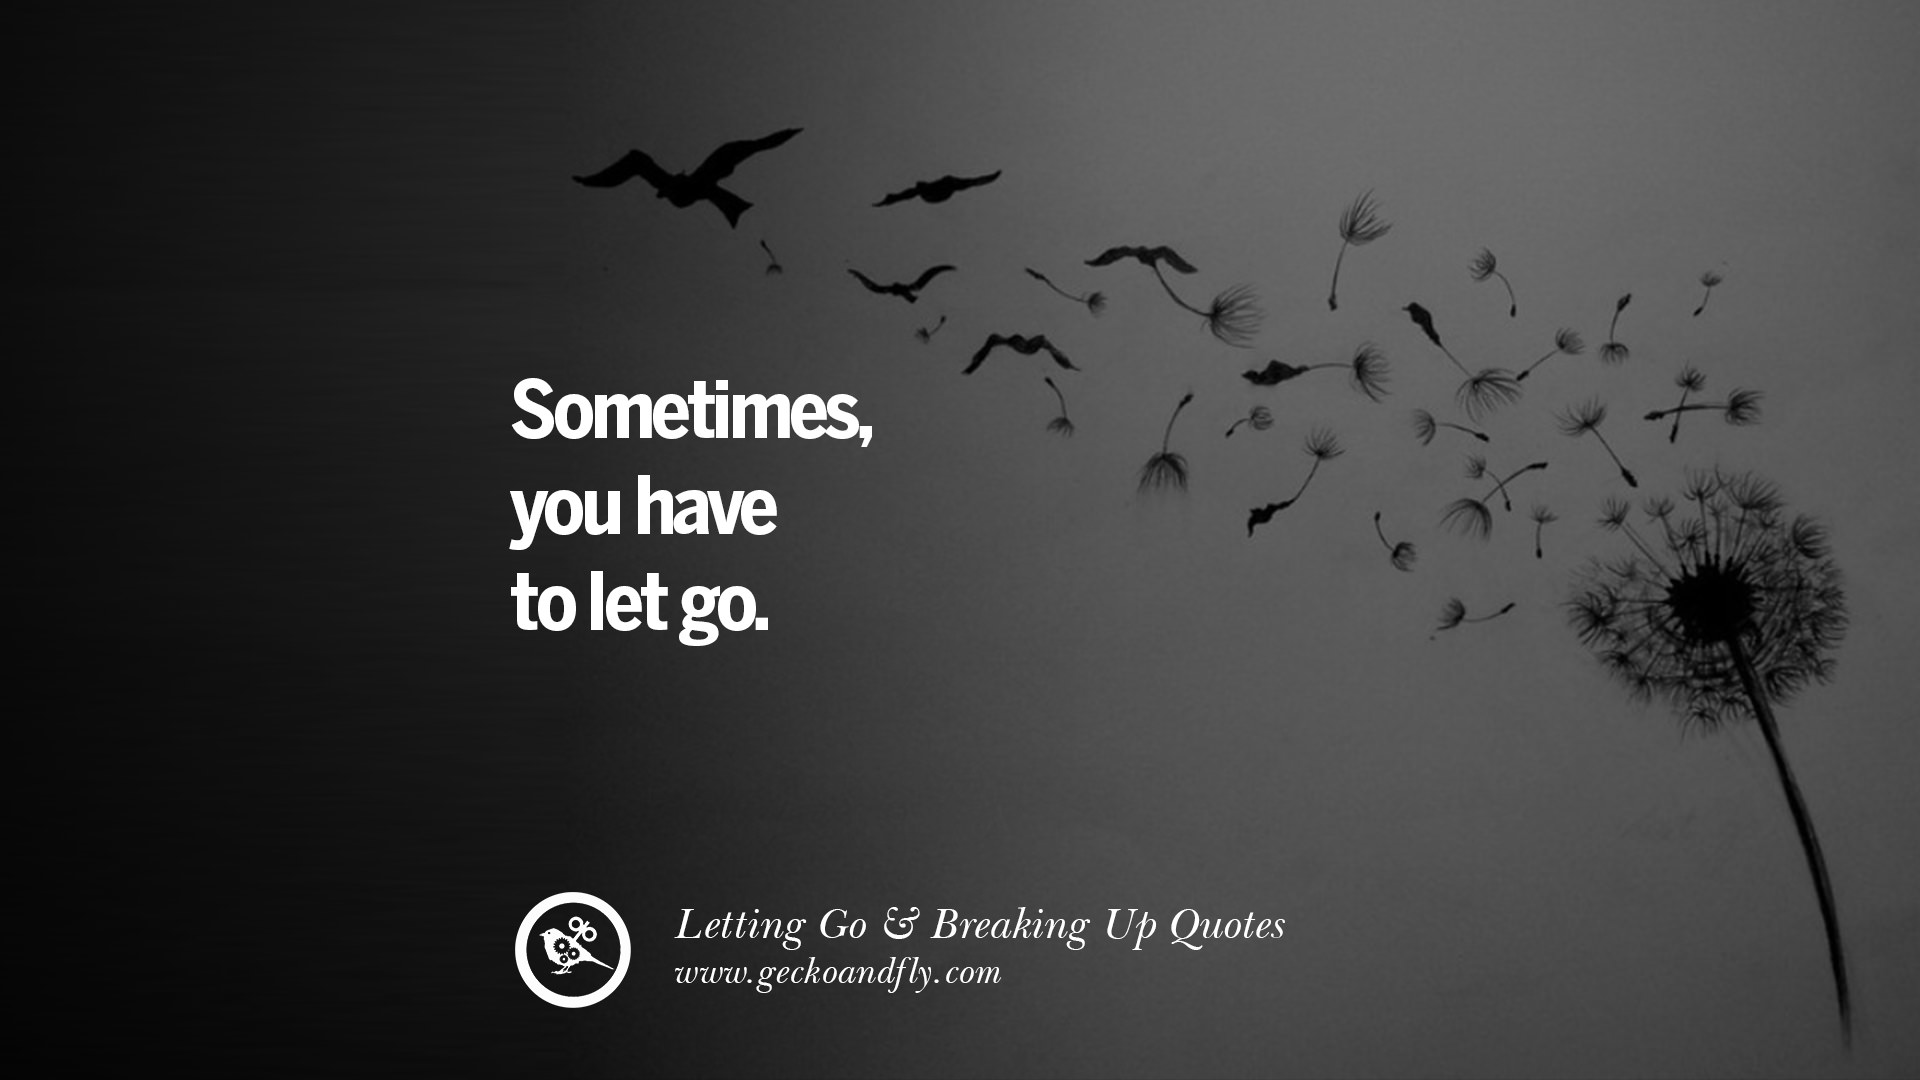 cdn.geckoandfly.com/wp-content/uploads/2016/01/letting-go-breaking-up-quotes16.jpg